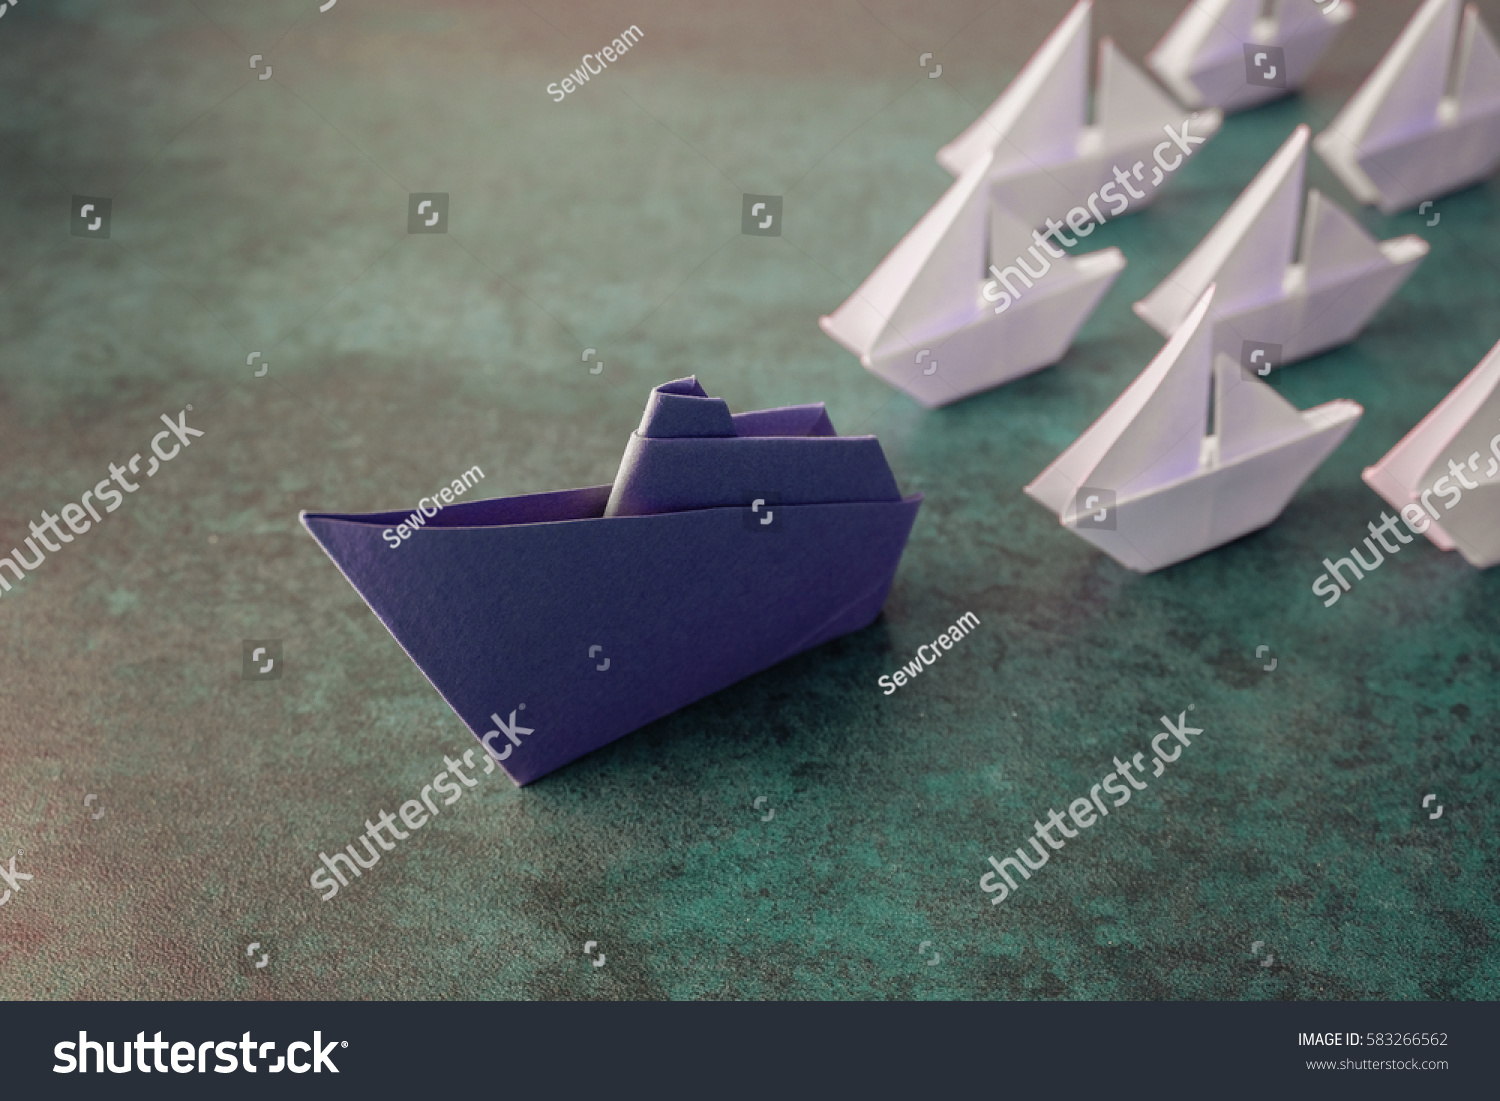 Origami paper ship boats, success leadership, strategy planning development, social media influence marketing, HR recruiter, disruptive innovation, breakthrough business model solutions concept #583266562